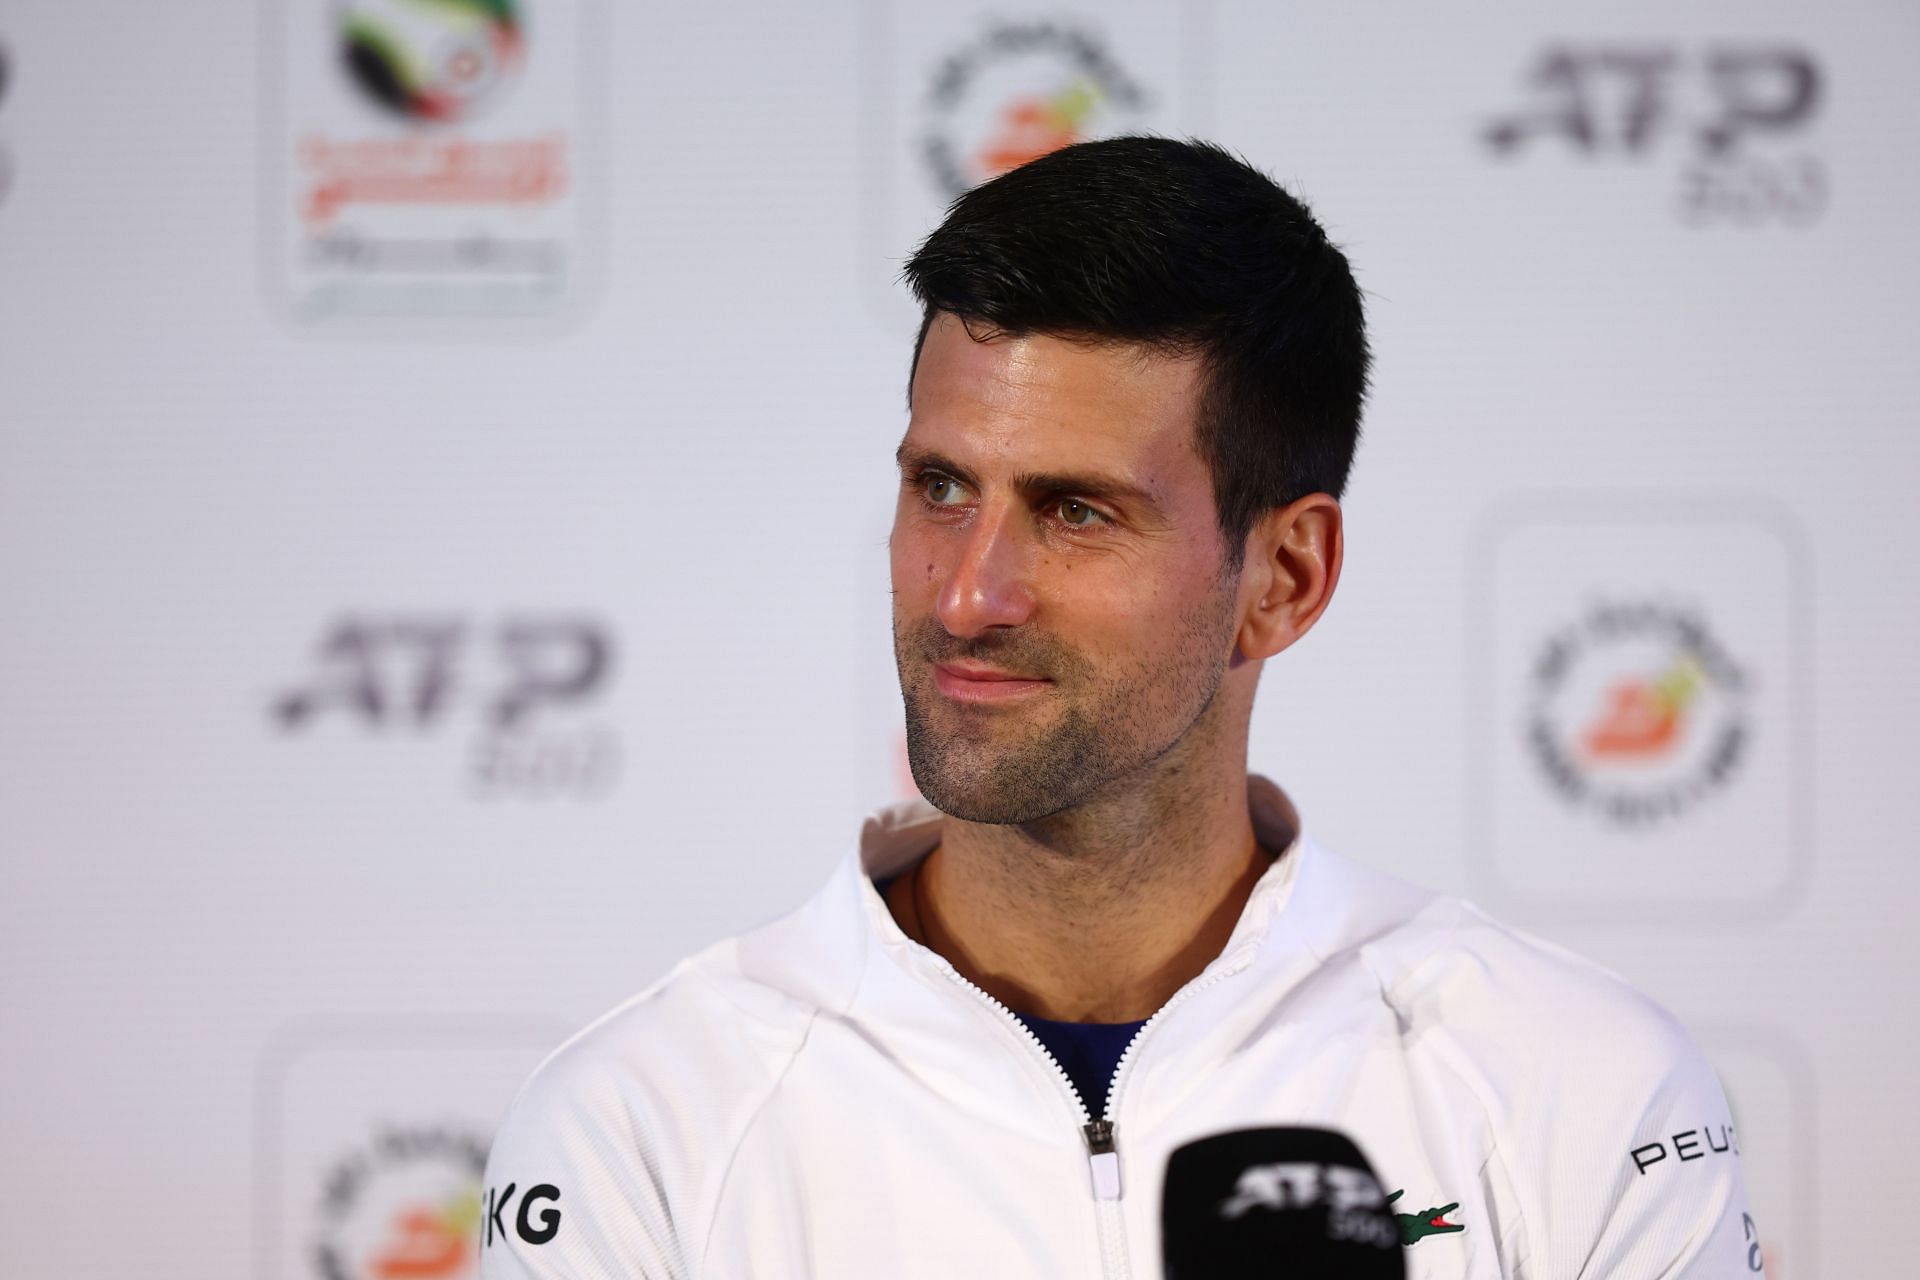 Novak Djokovic pictured at a press conference in the Dubai Duty-Free Tennis Championships.